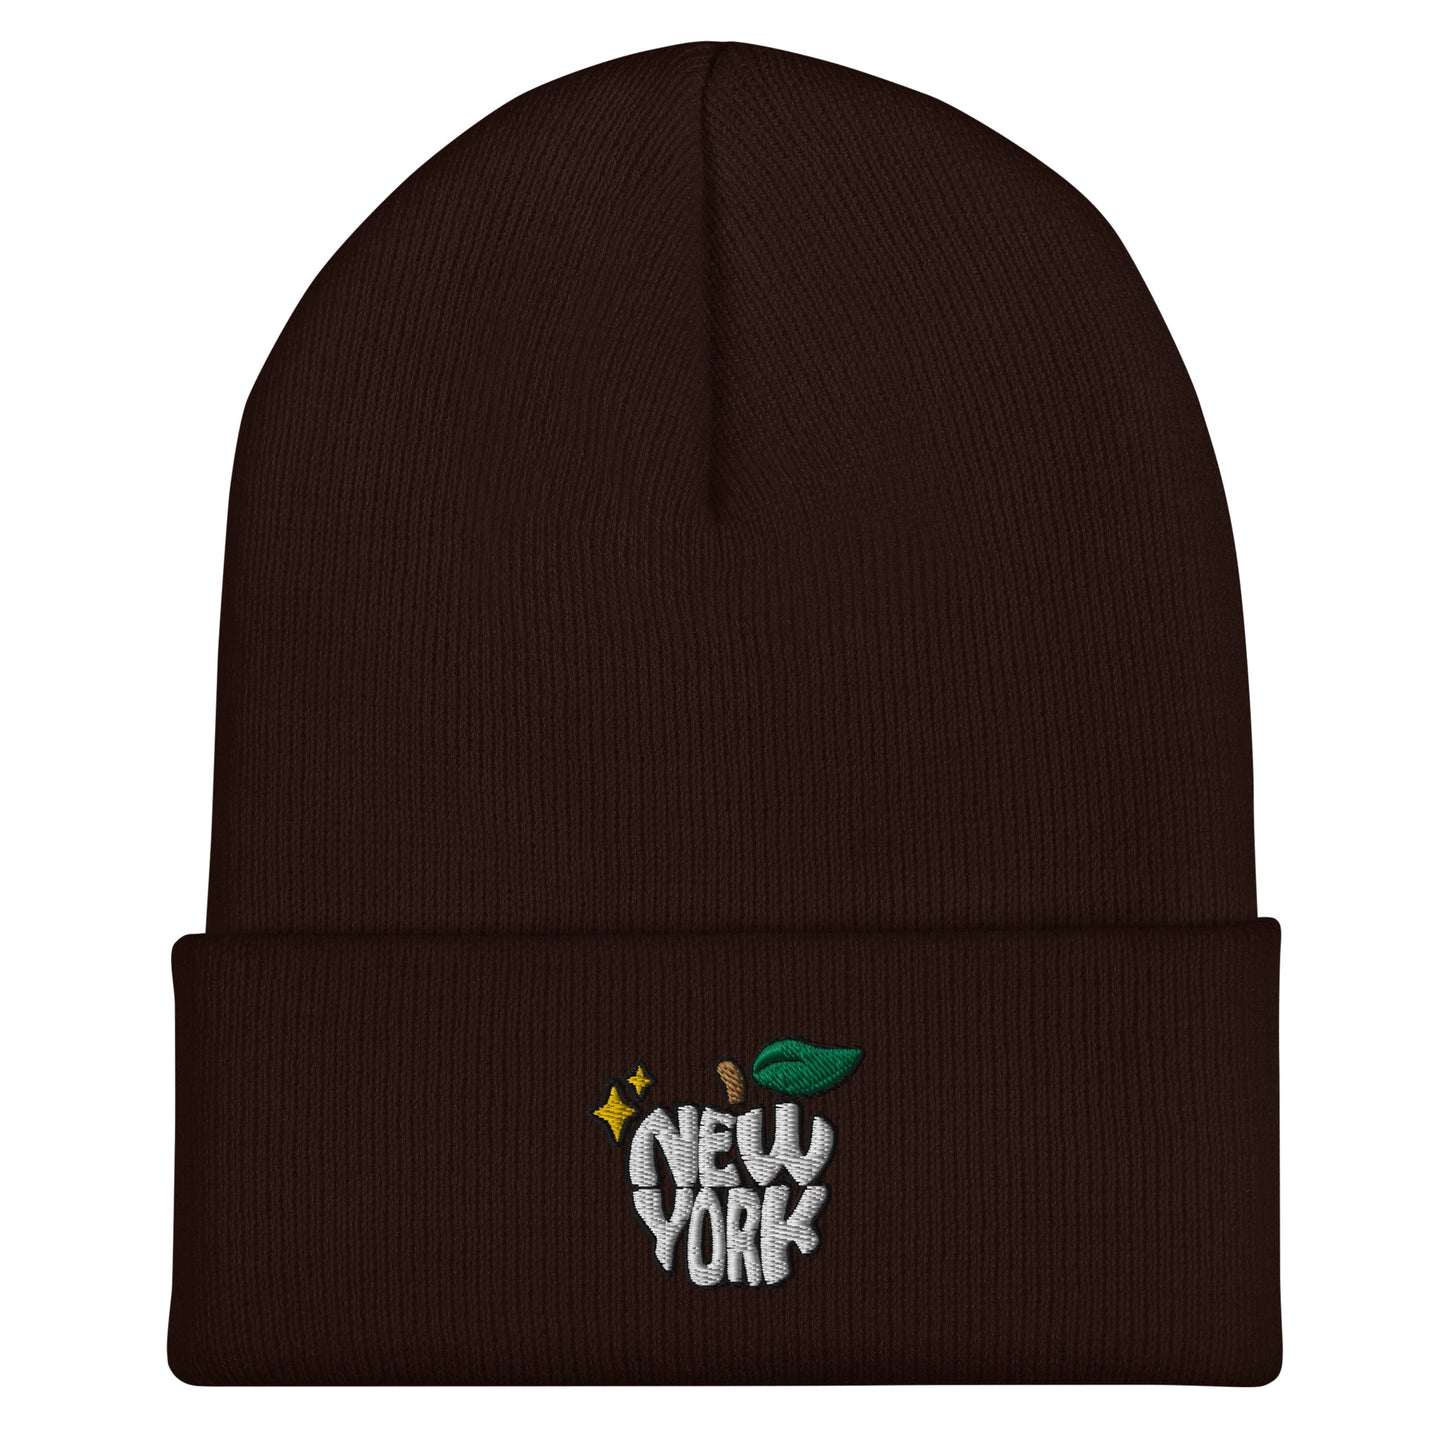 New York Apple Logo Embroidered Brown Cuffed Beanie Hat Scattered Streetwear